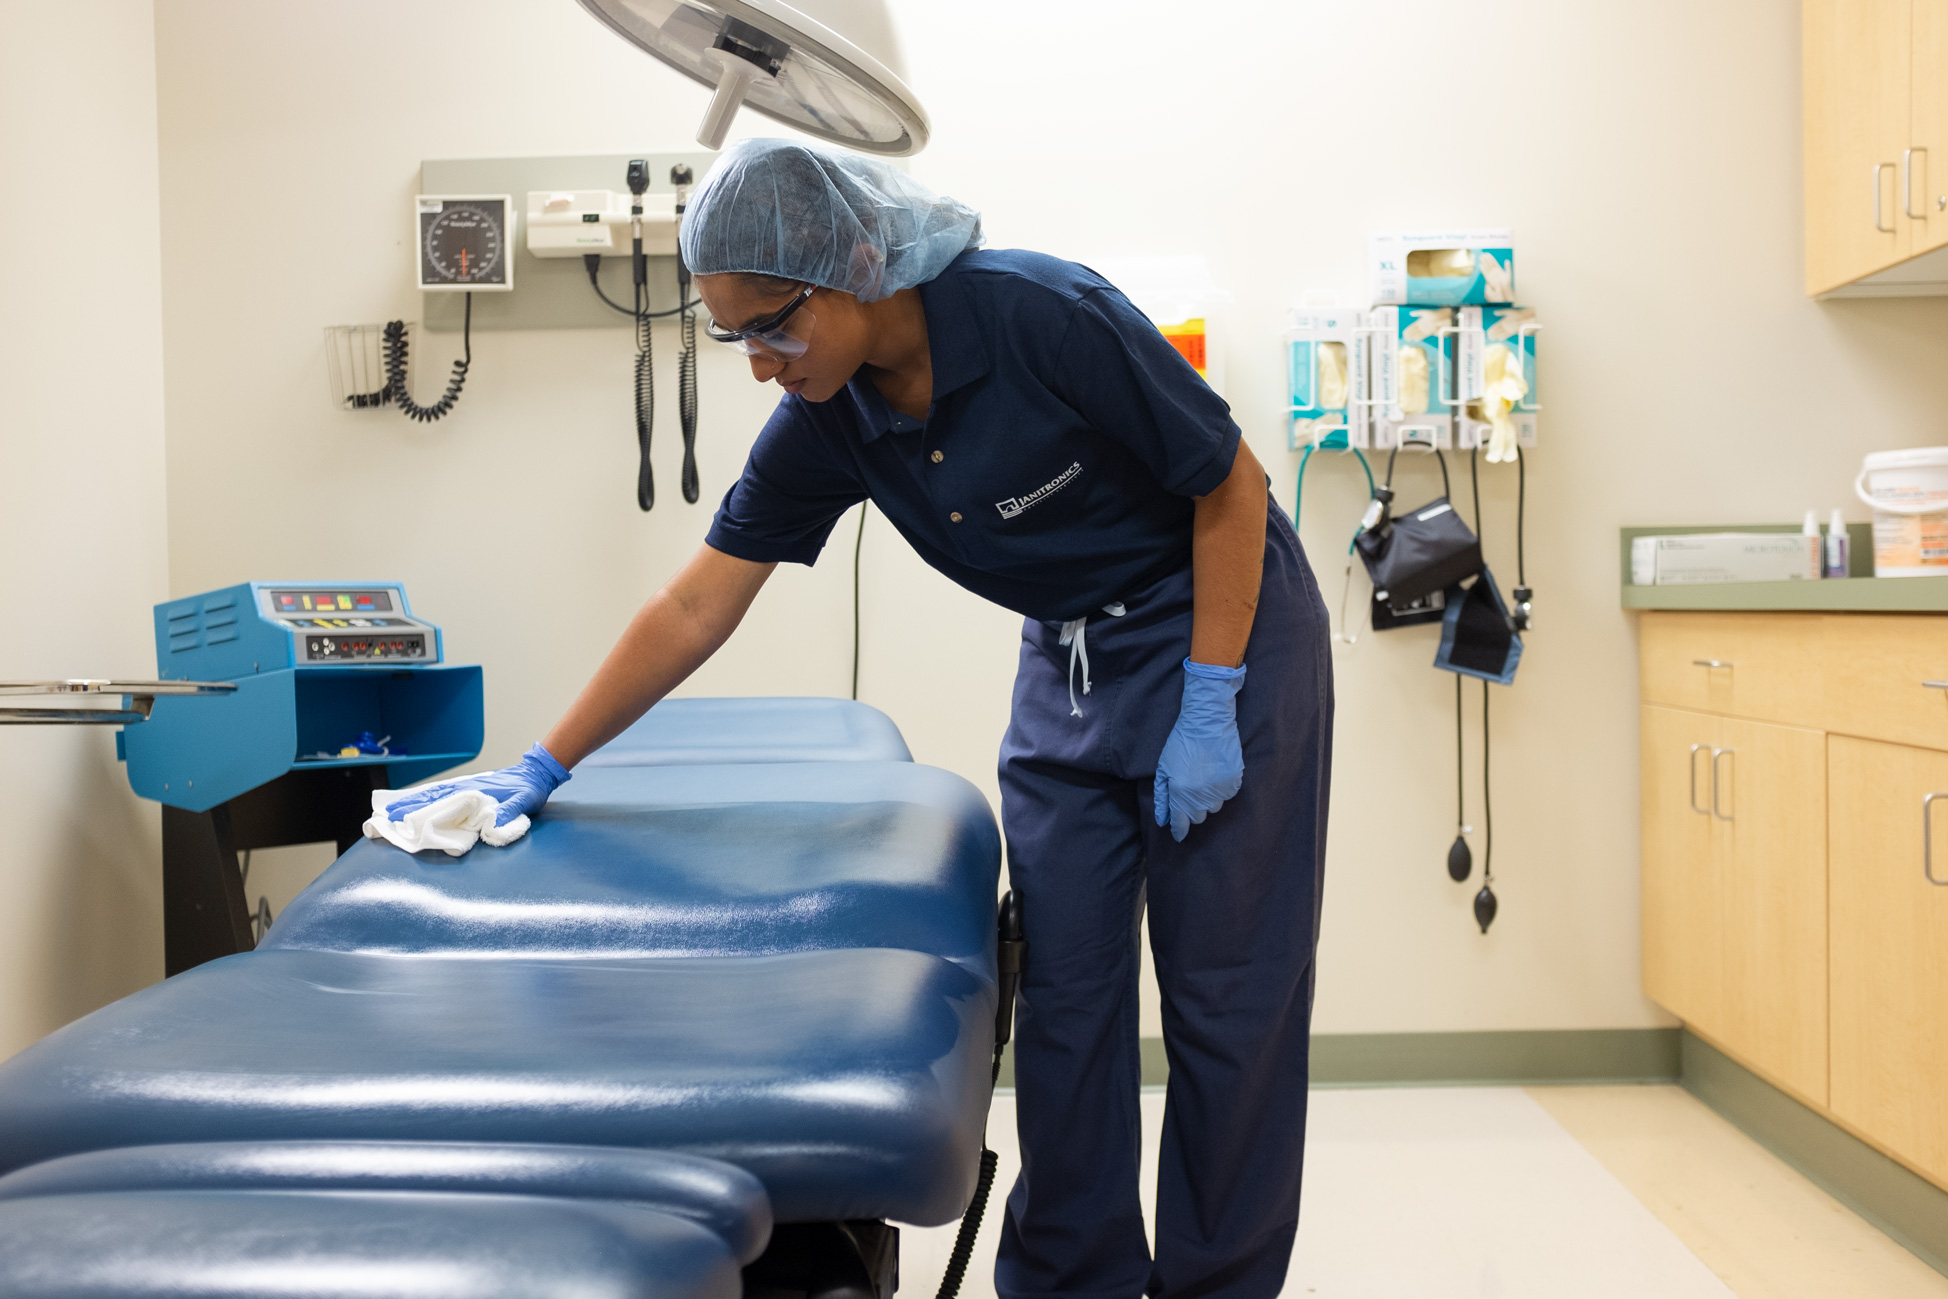 Employee cleaning a medical examination table wearing blue gloves